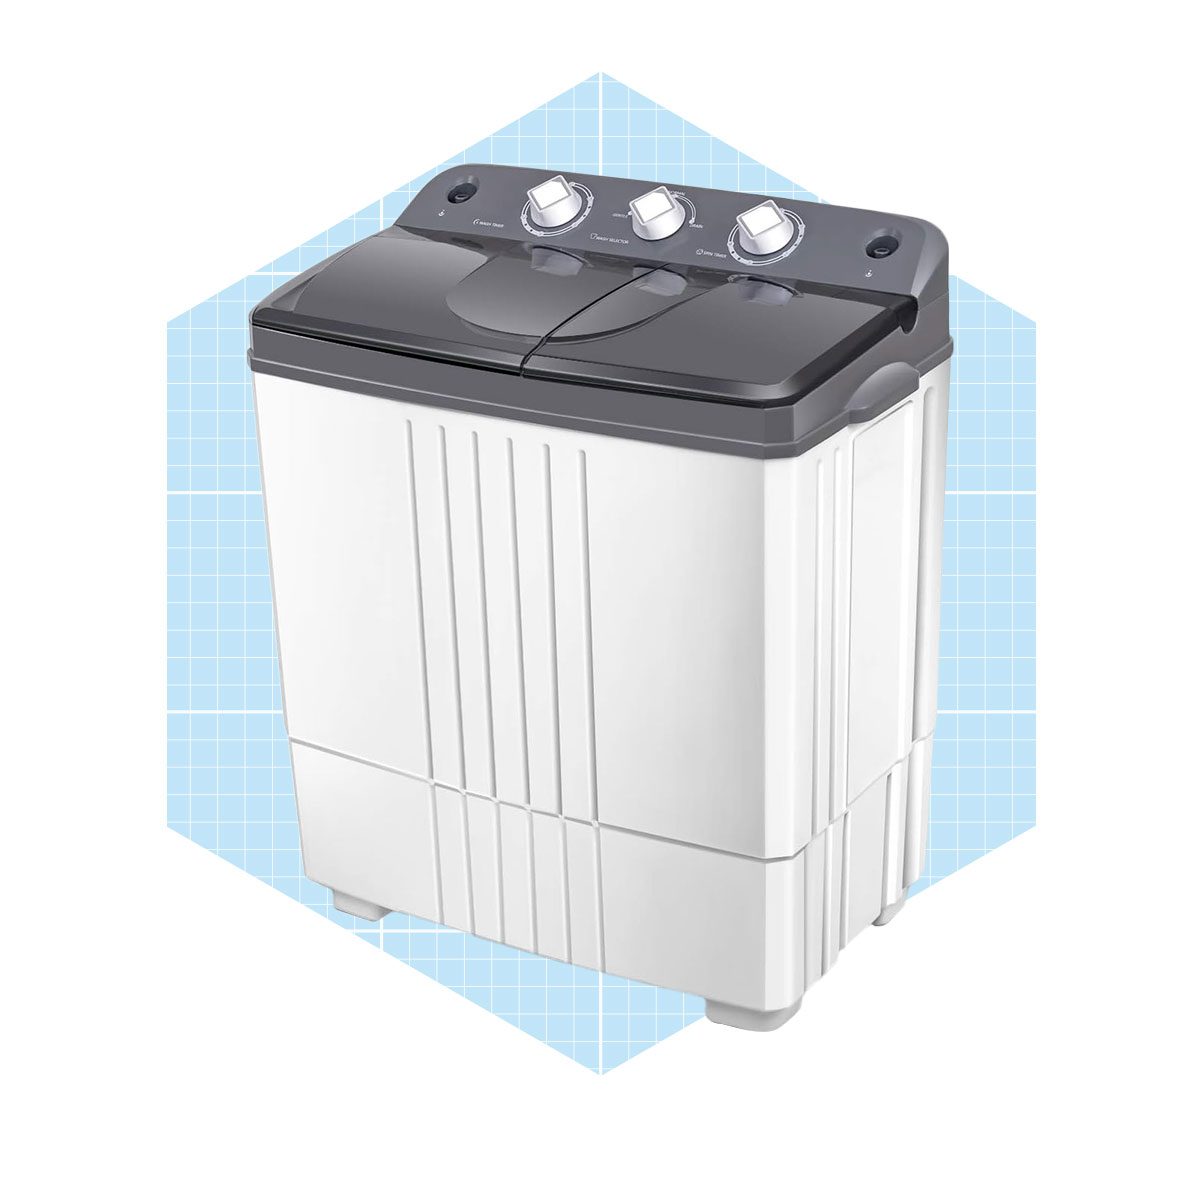 BLACK+DECKER 2.0 Cu. Ft. Small Portable Washer - Review 2023 